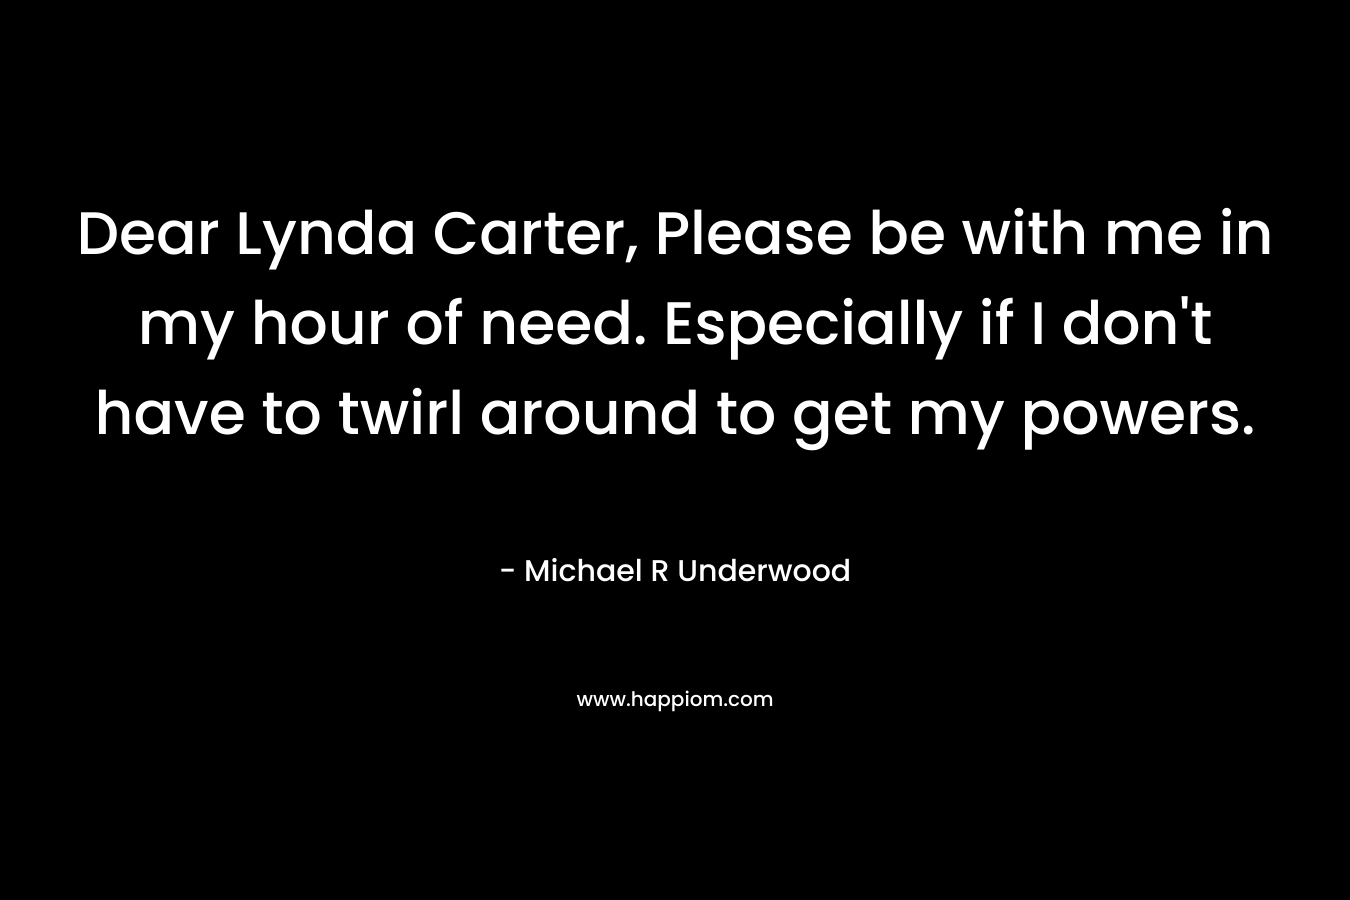 Dear Lynda Carter, Please be with me in my hour of need. Especially if I don’t have to twirl around to get my powers. – Michael R Underwood